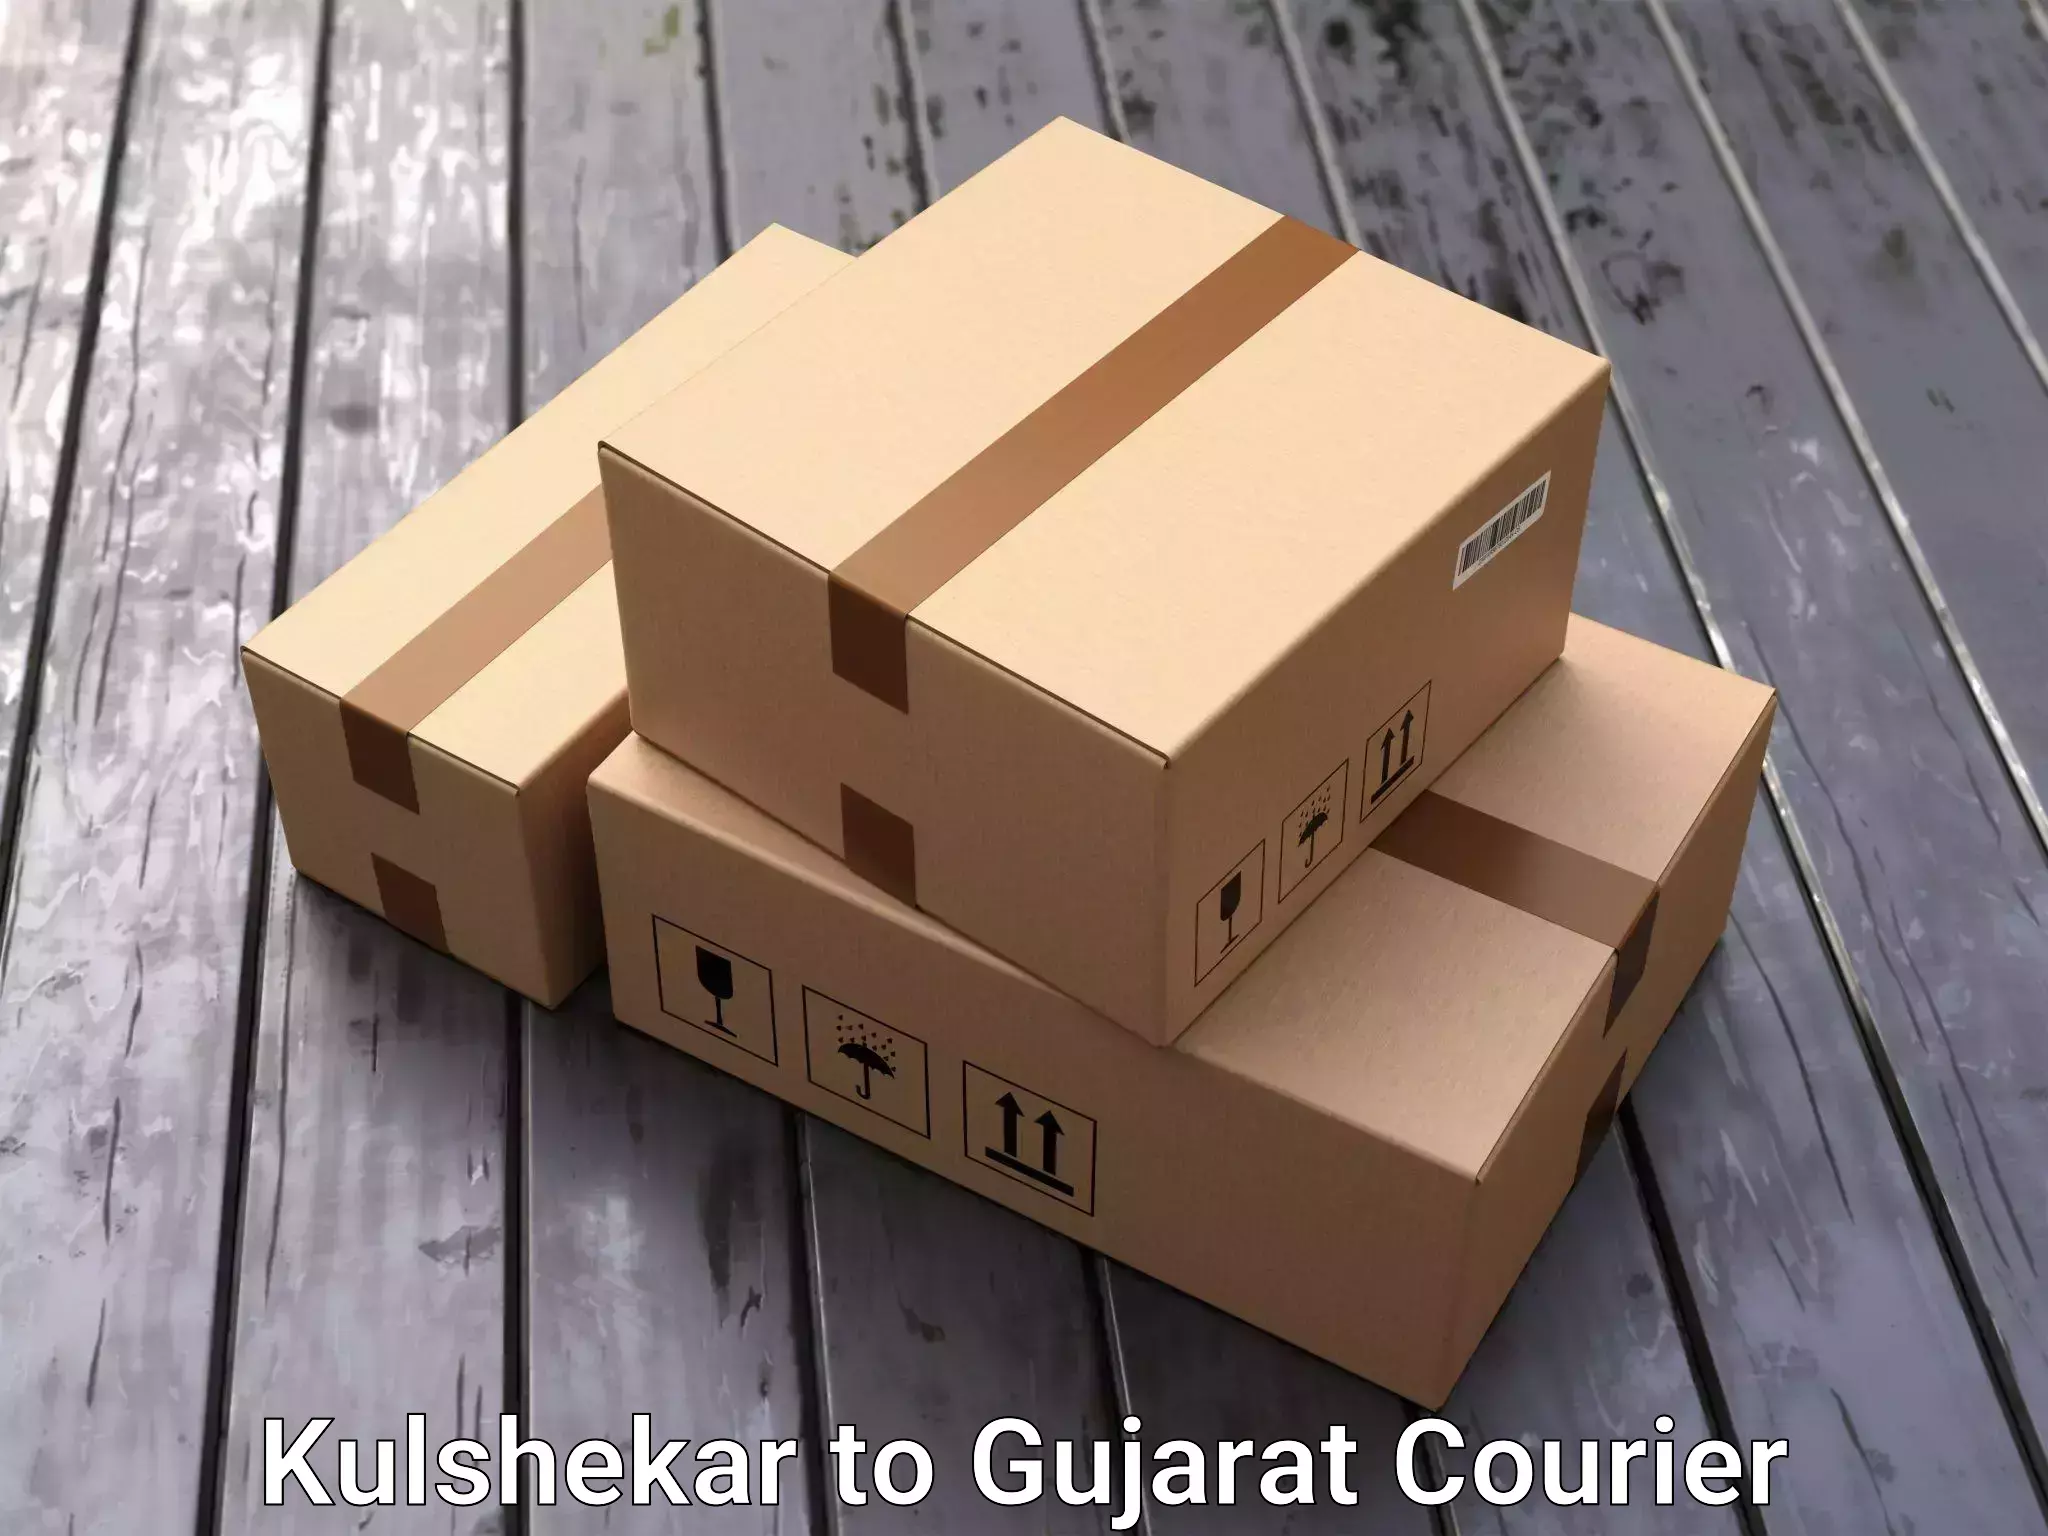 Dependable moving services in Kulshekar to Gujarat